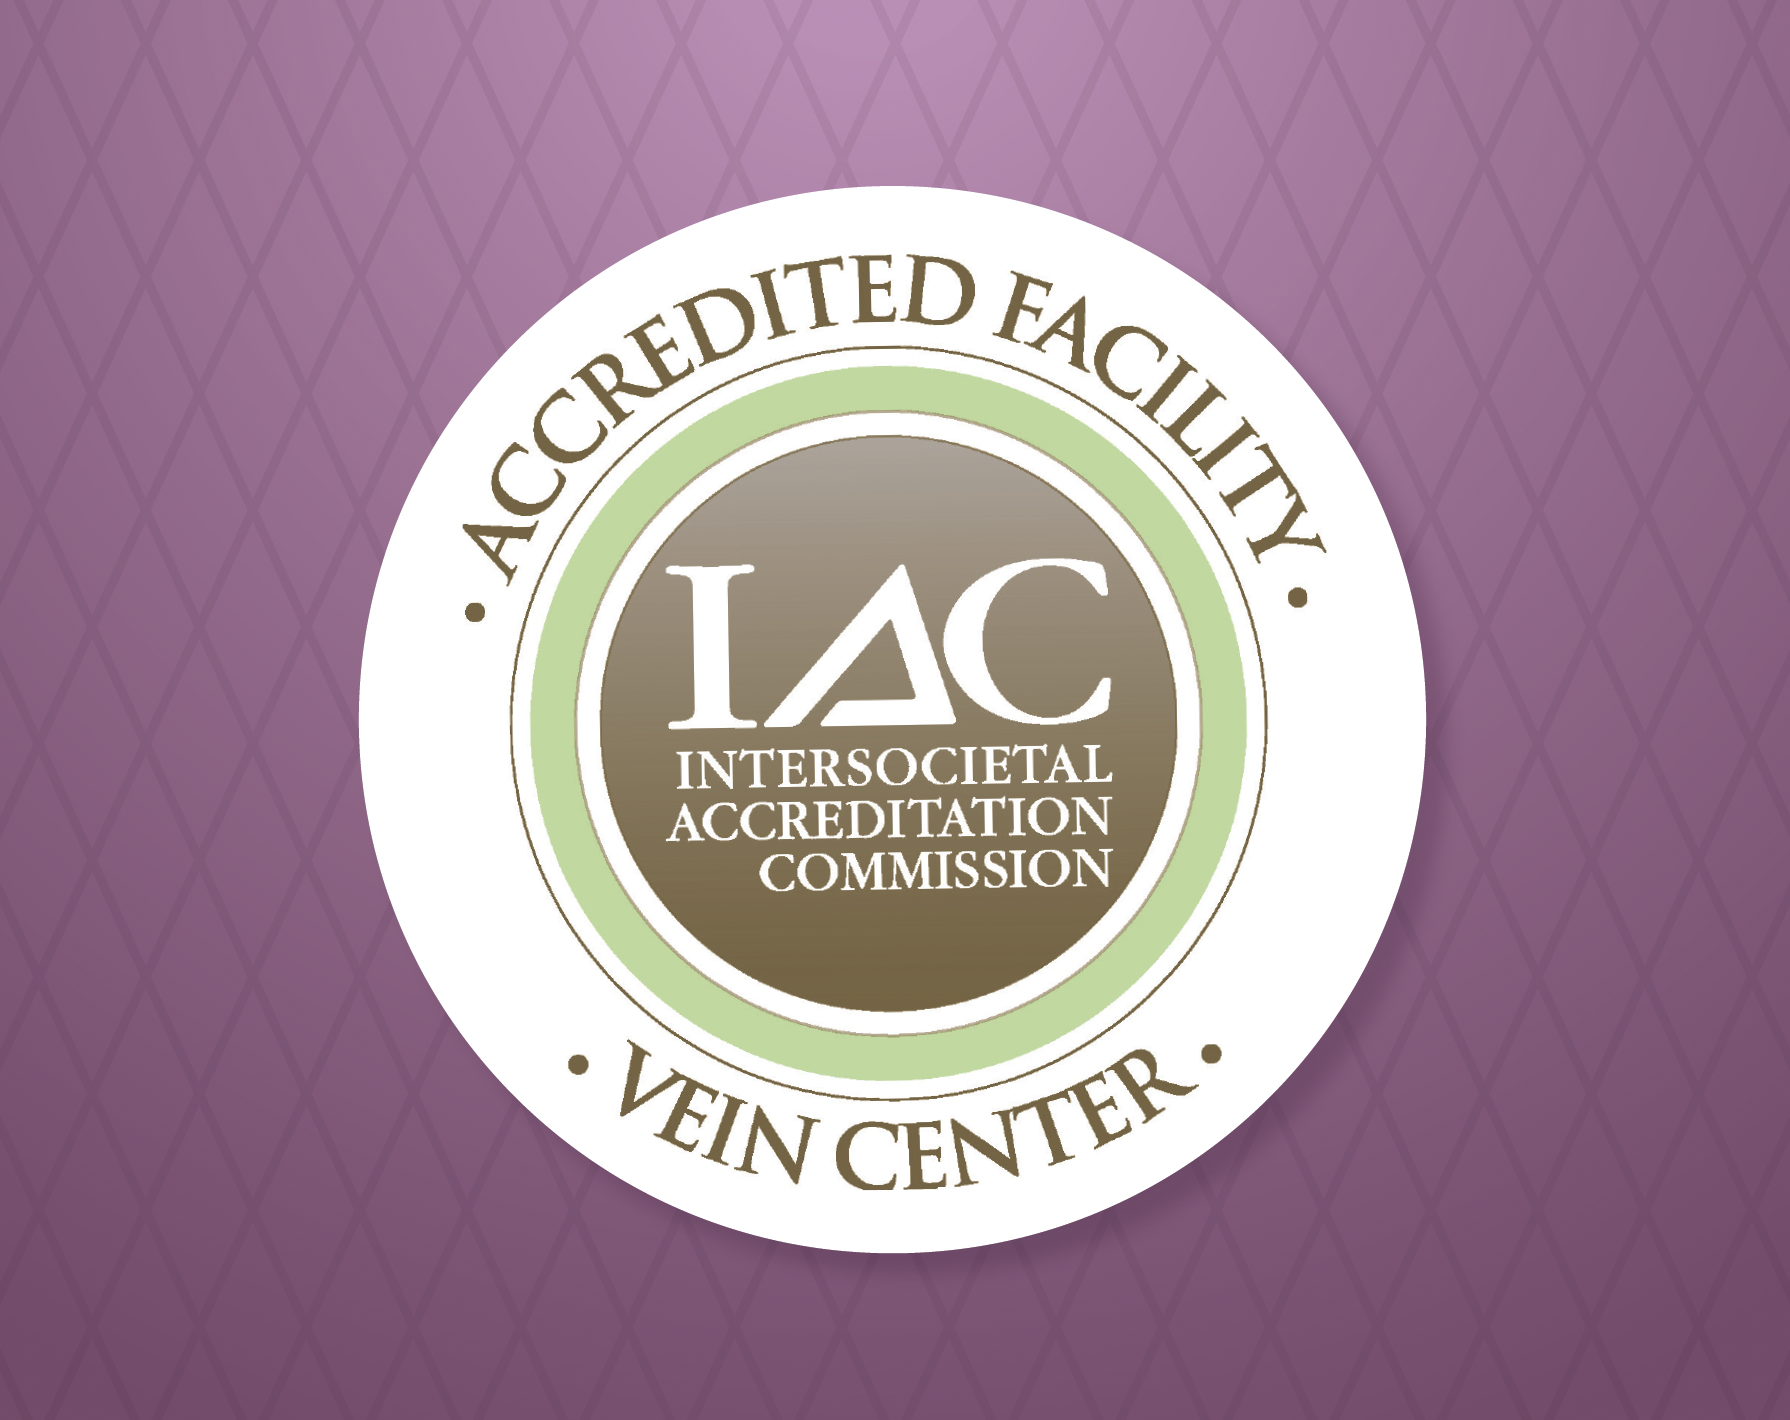 Accreditated by the Intersocietal Accreditation Commission (IAC)